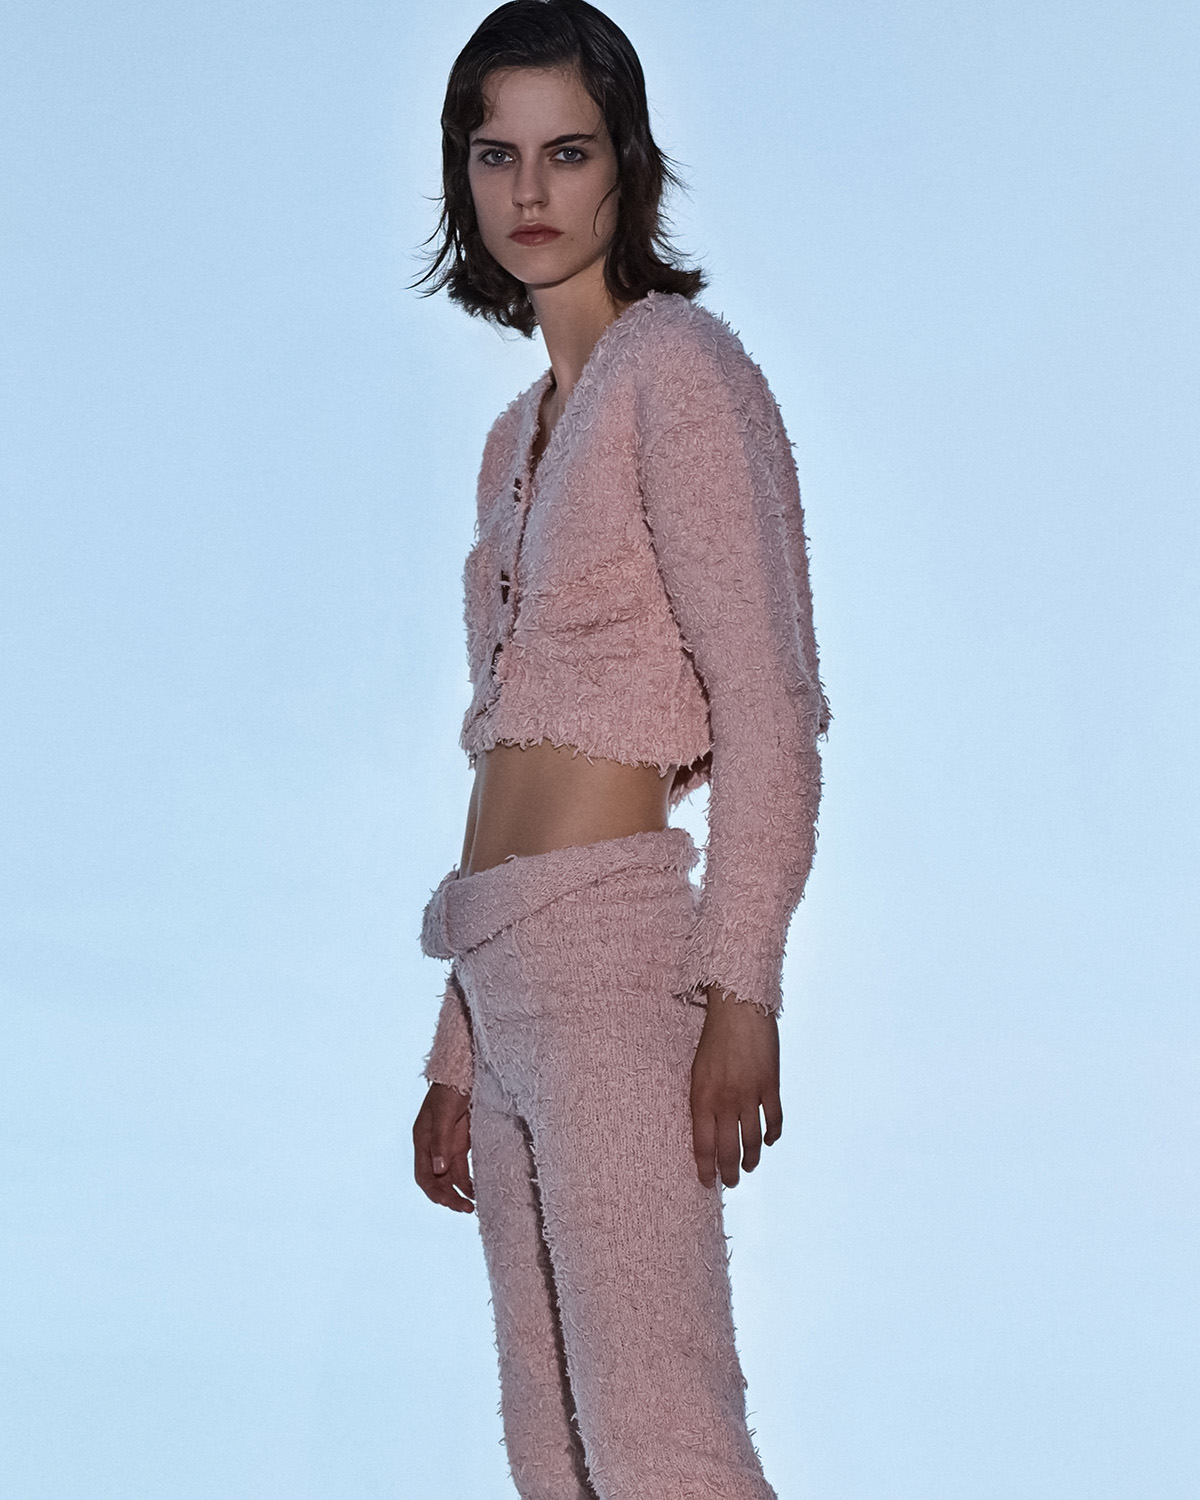 ''Knits & Pieces'' by Josh Olins for WSJ. Magazine Fall 2021